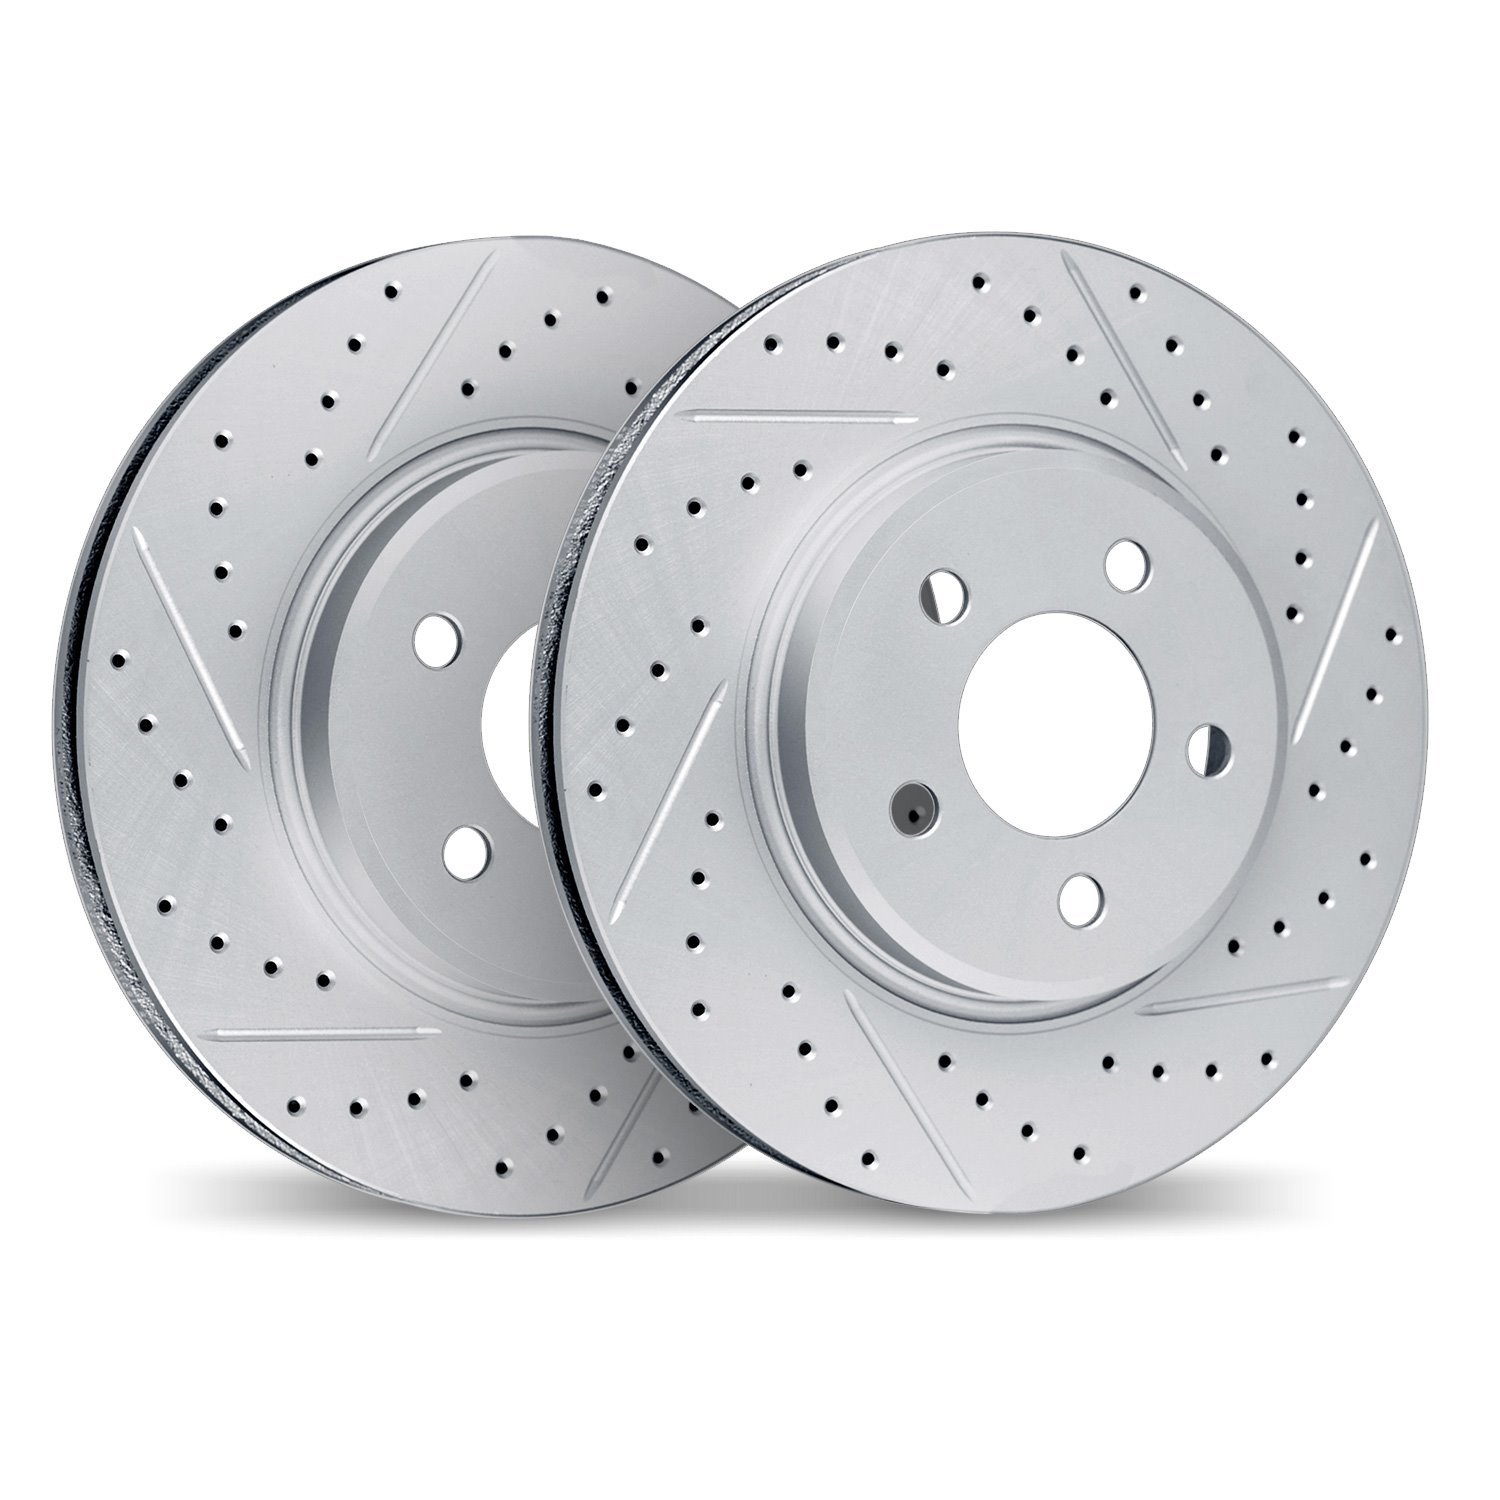 2002-46036 Geoperformance Drilled/Slotted Brake Rotors, Fits Select GM, Position: Rear